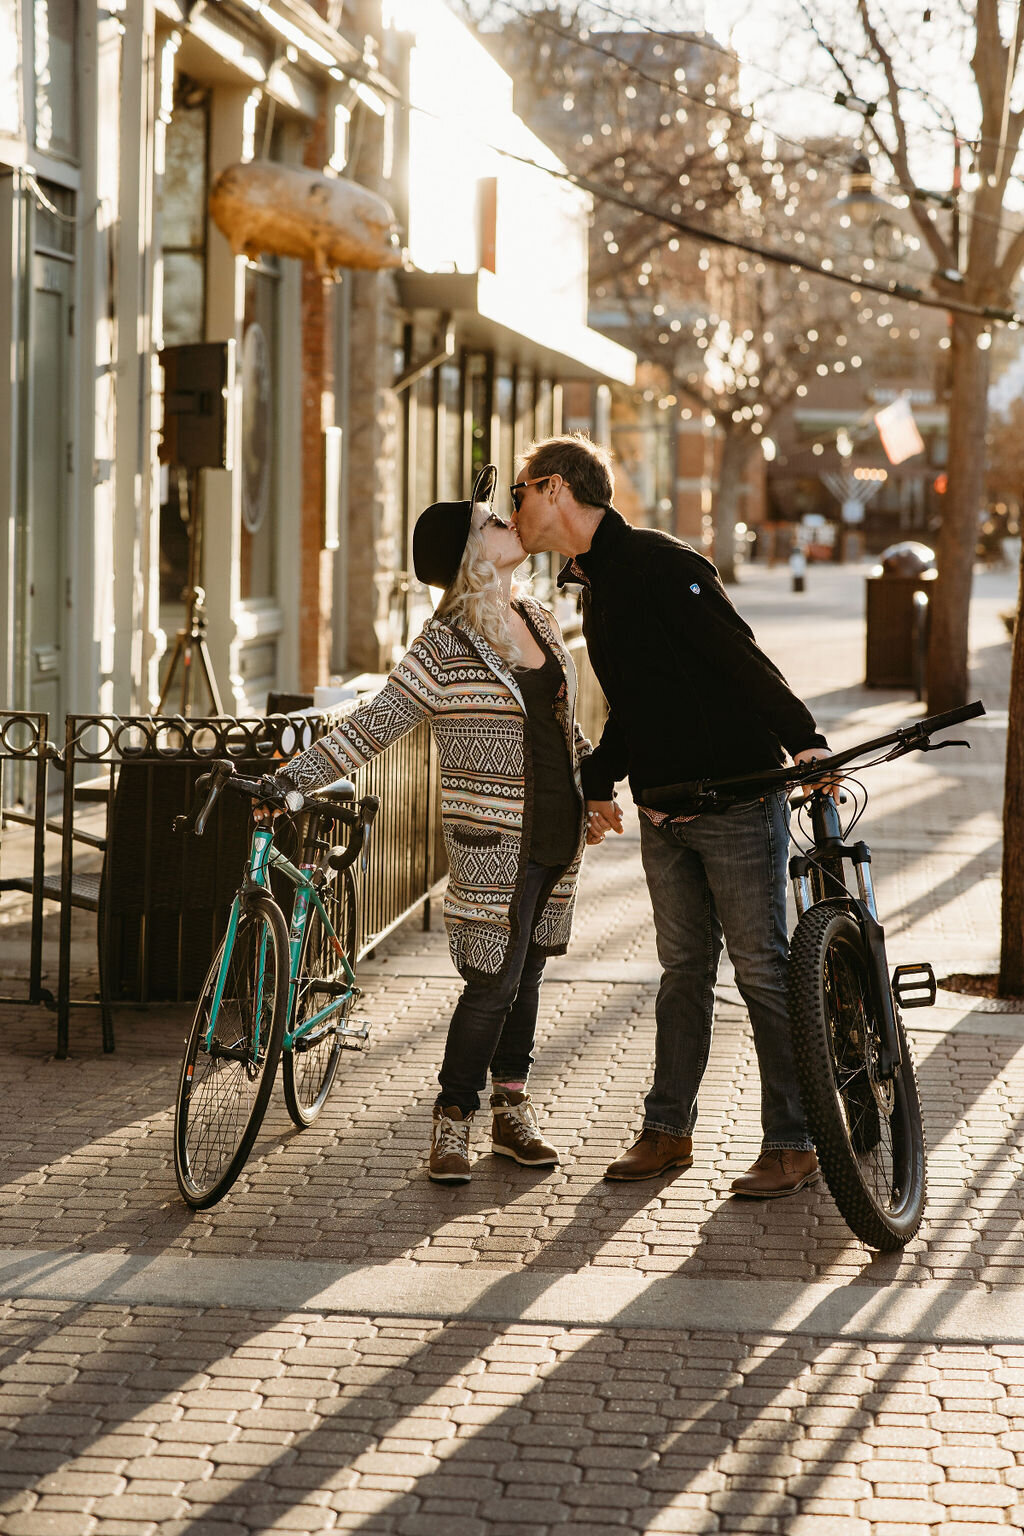 Old town fort collins engagement session